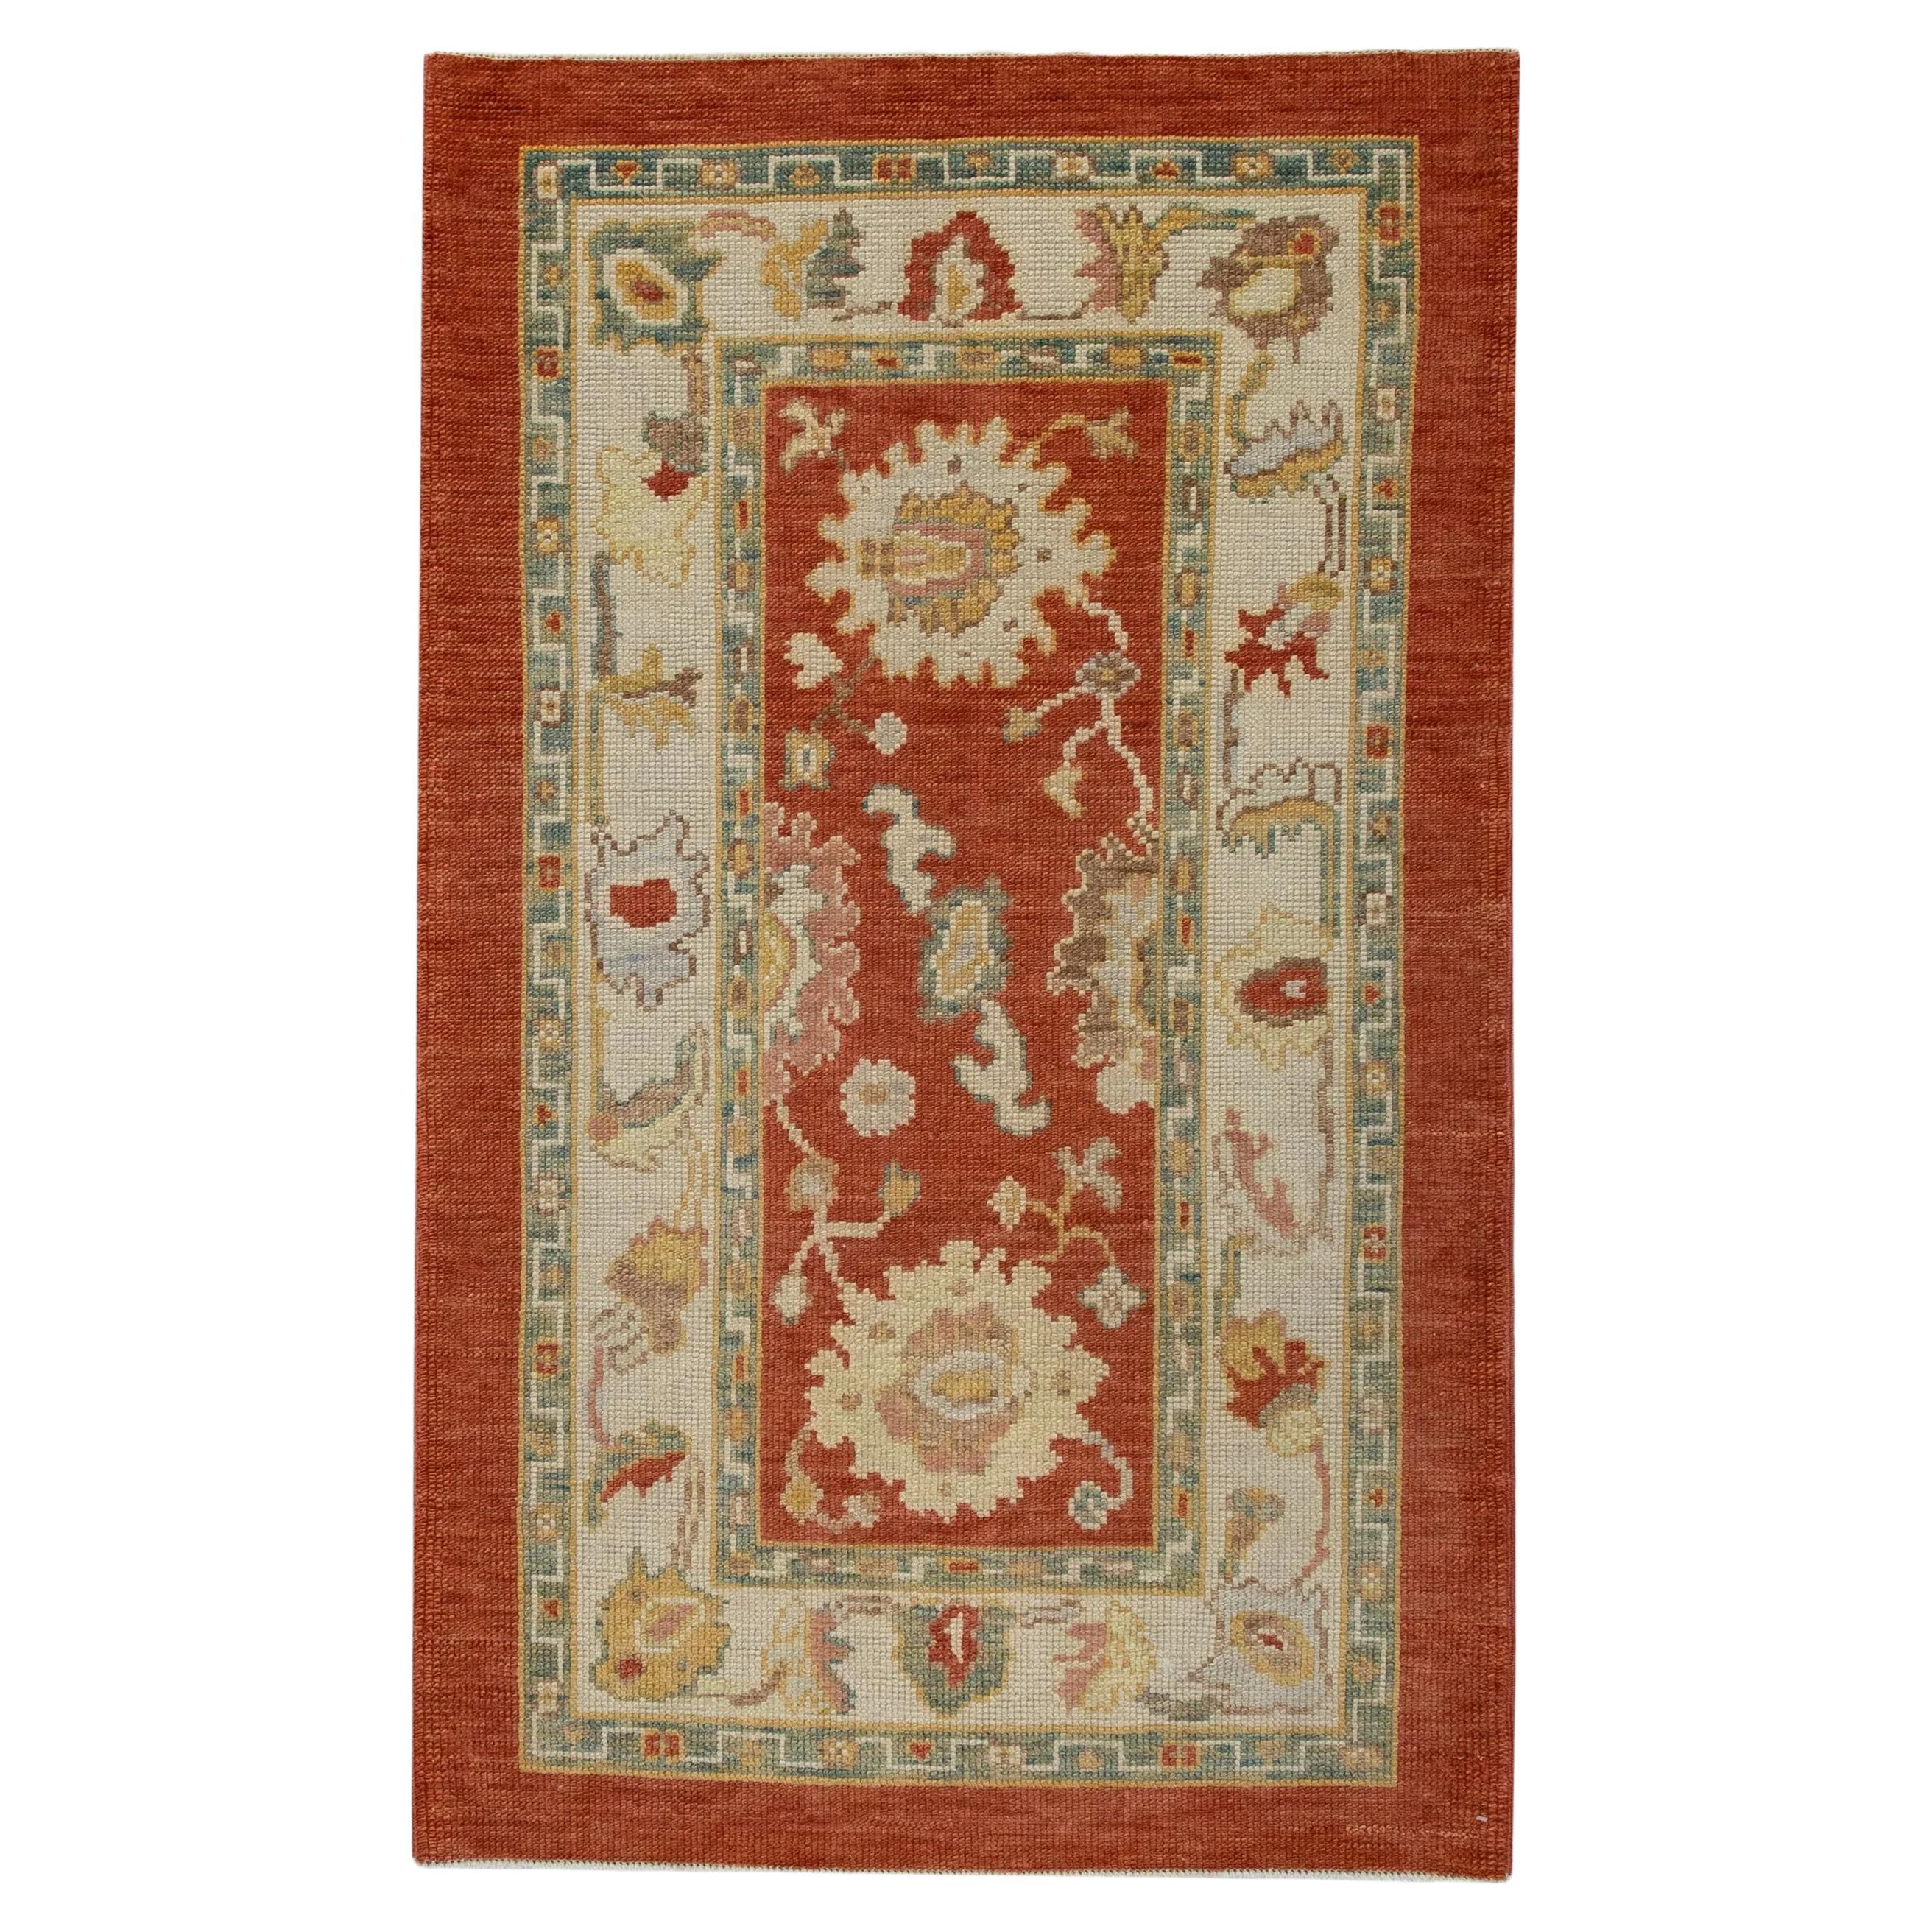 Floral Handwoven Wool Turkish Oushak Rug in Deep Red, Cream, and Green 3'1x4'10 For Sale